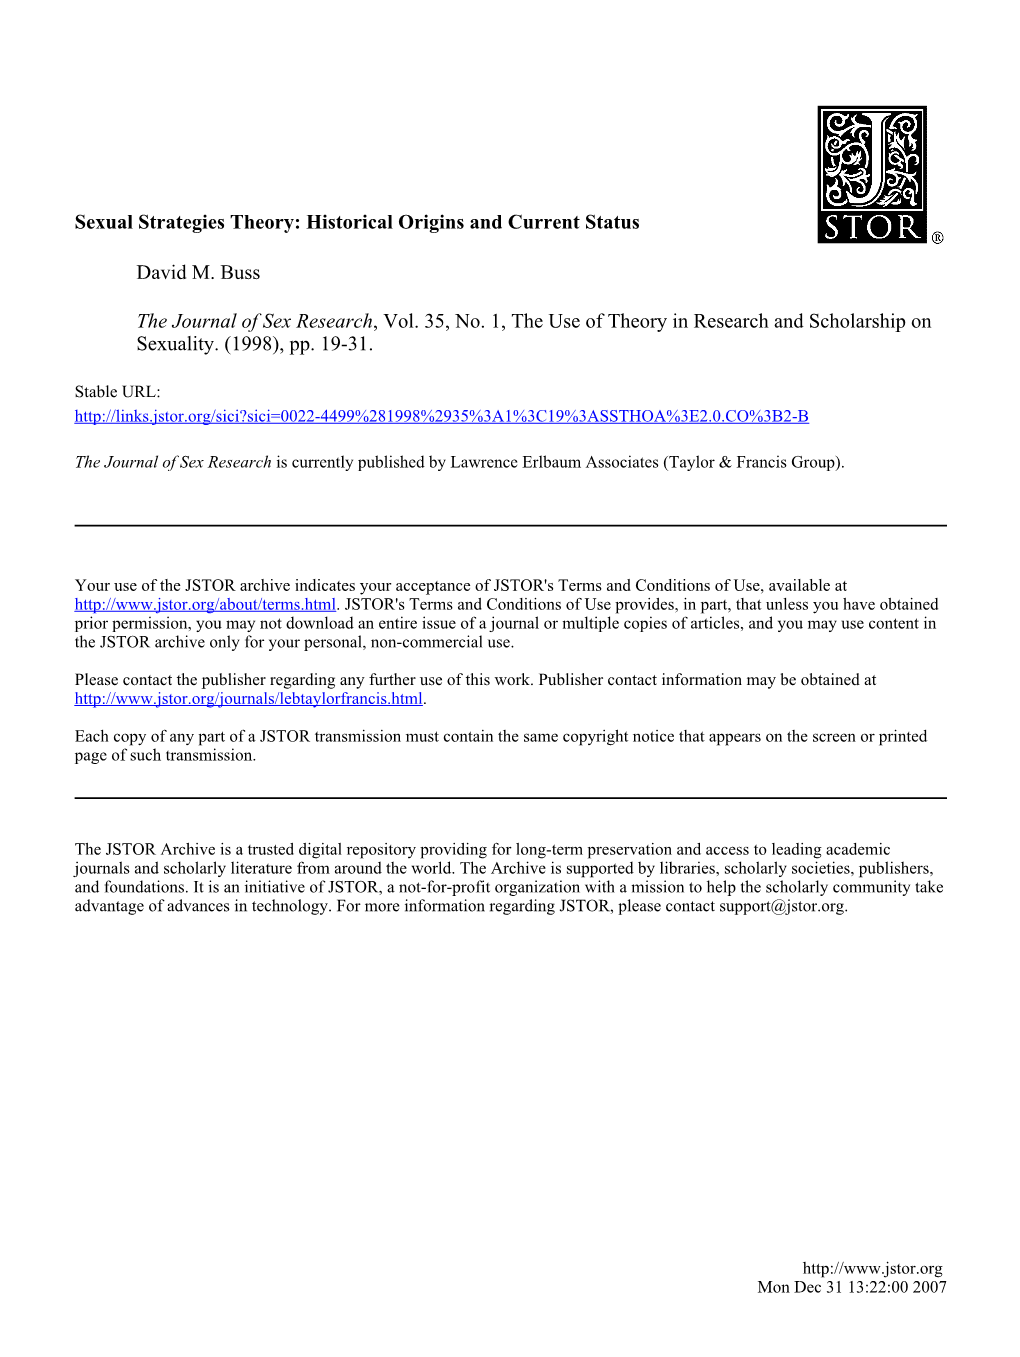 Sexual Strategies Theory: Historical Origins and Current Status David M